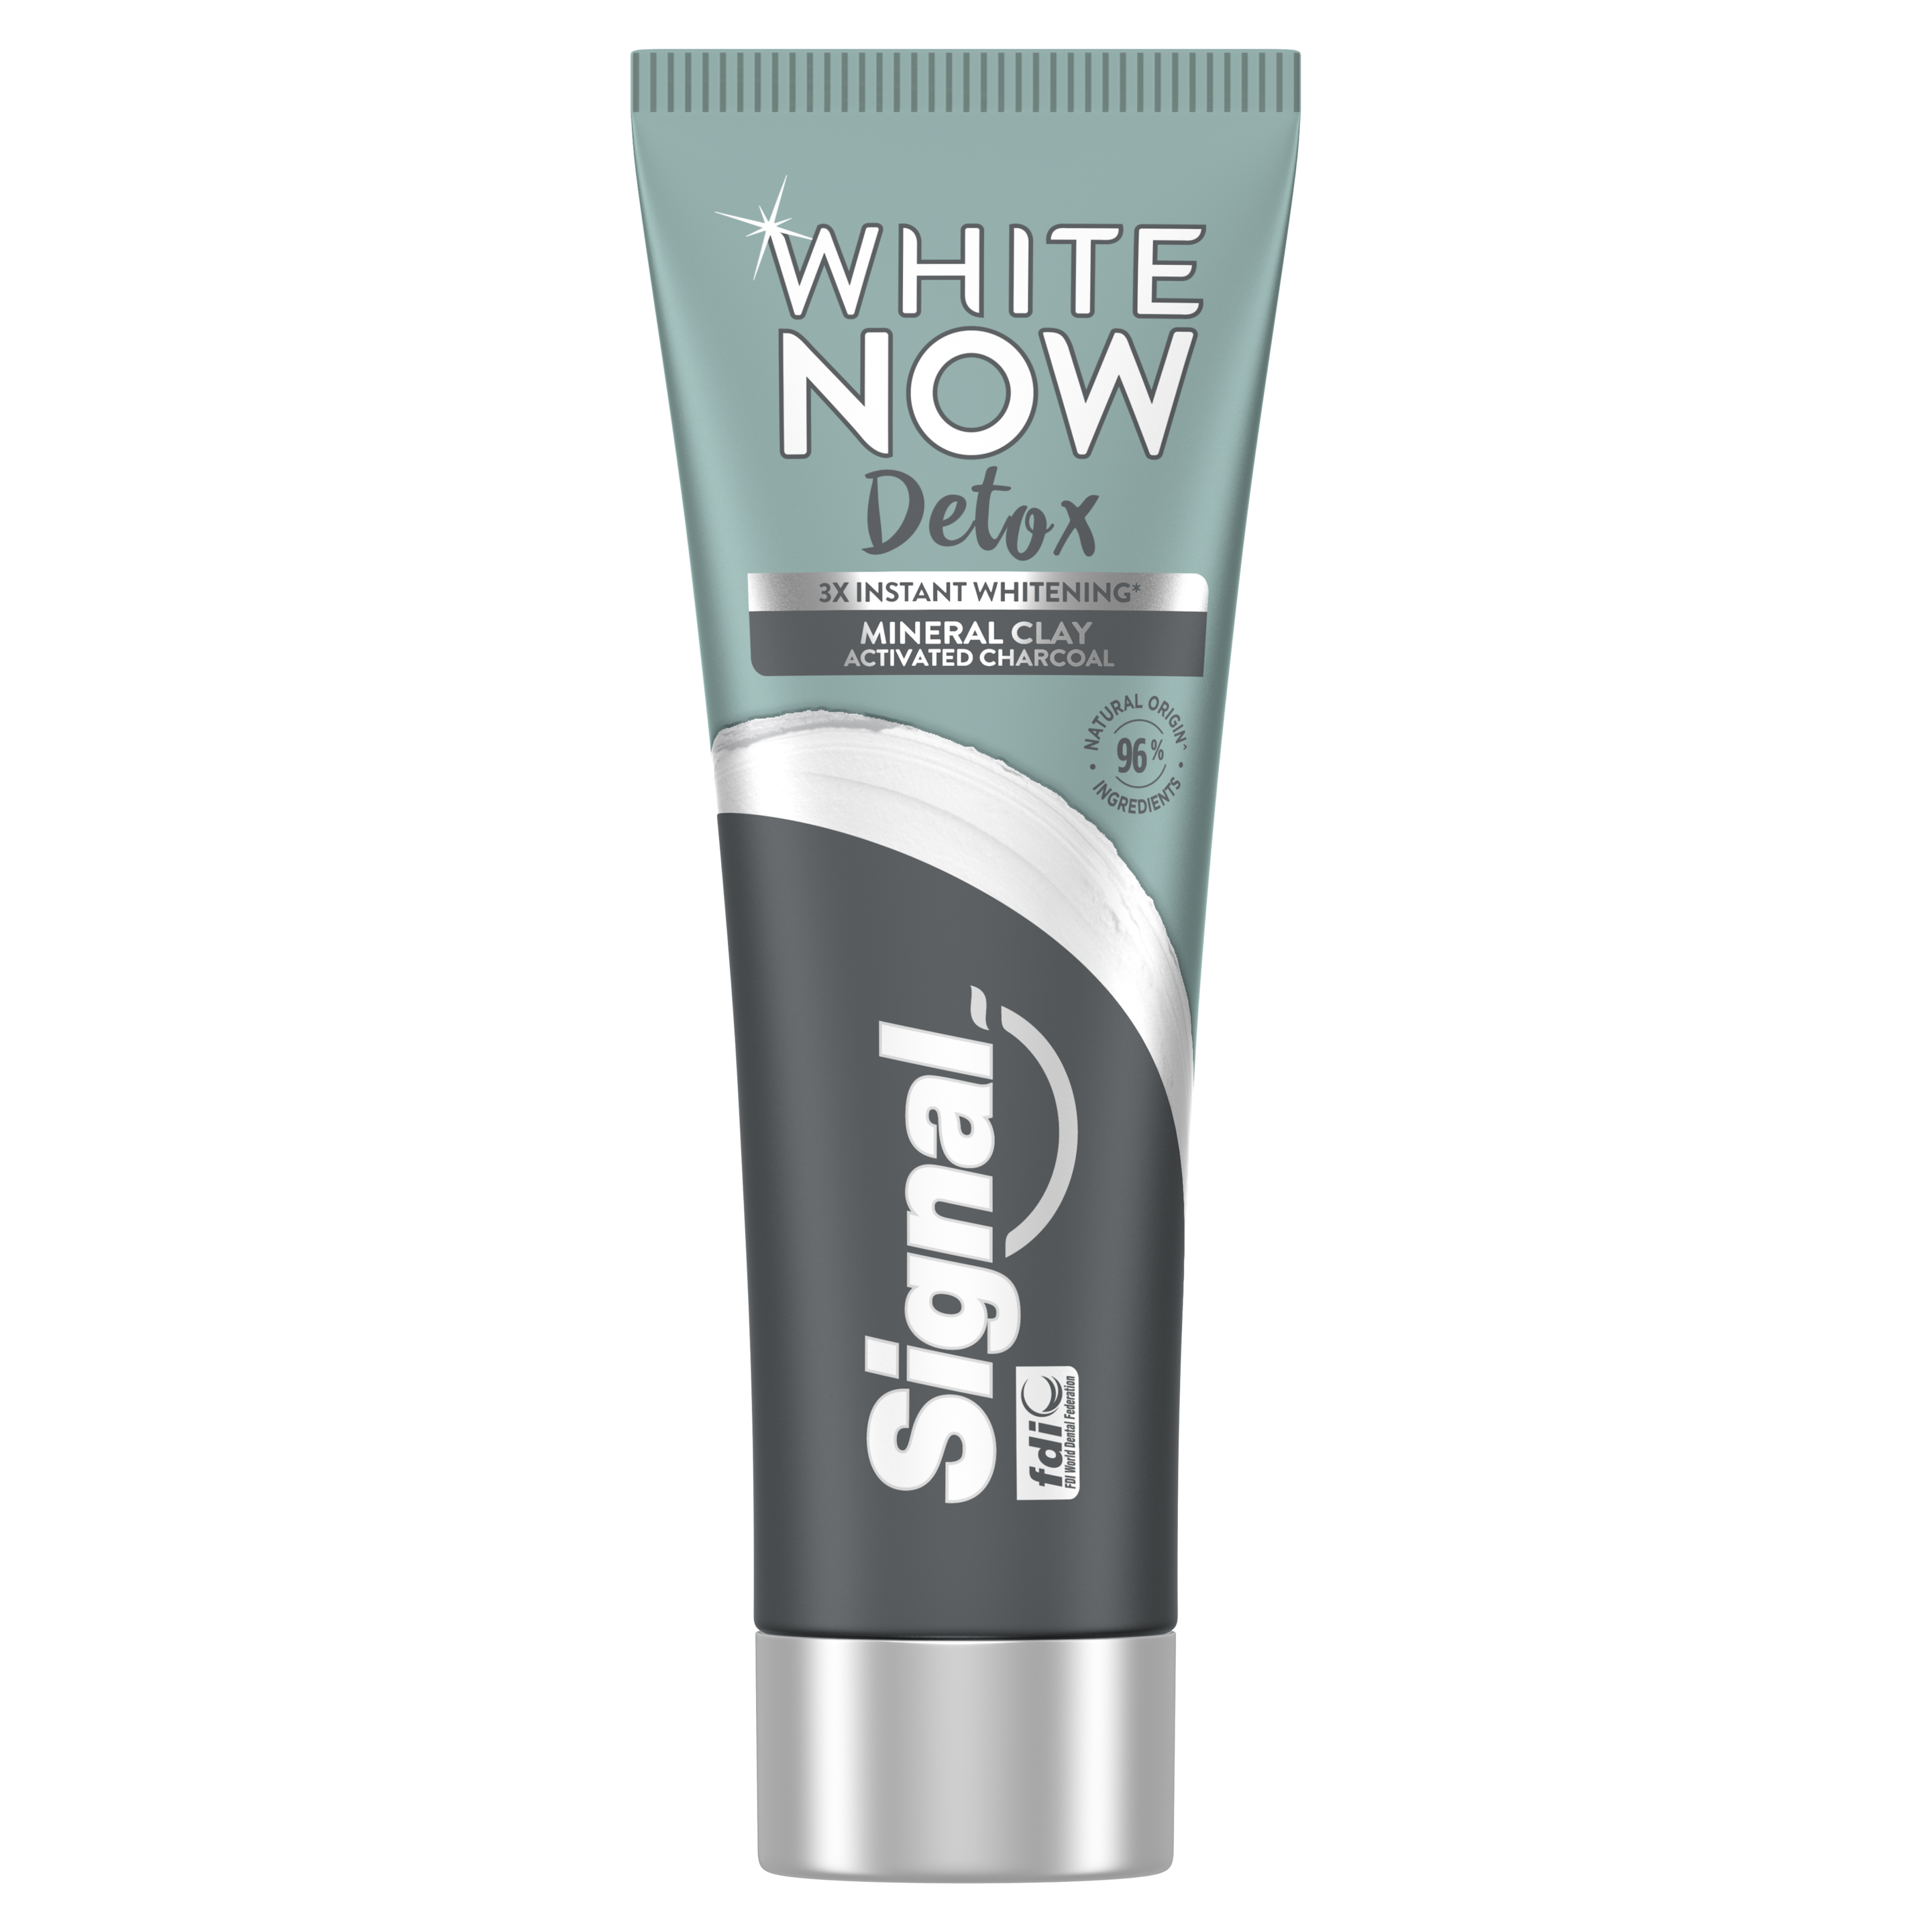 Signal White Now Detox Mineral Clay & Activated Charcoal fogkrém 75 ml